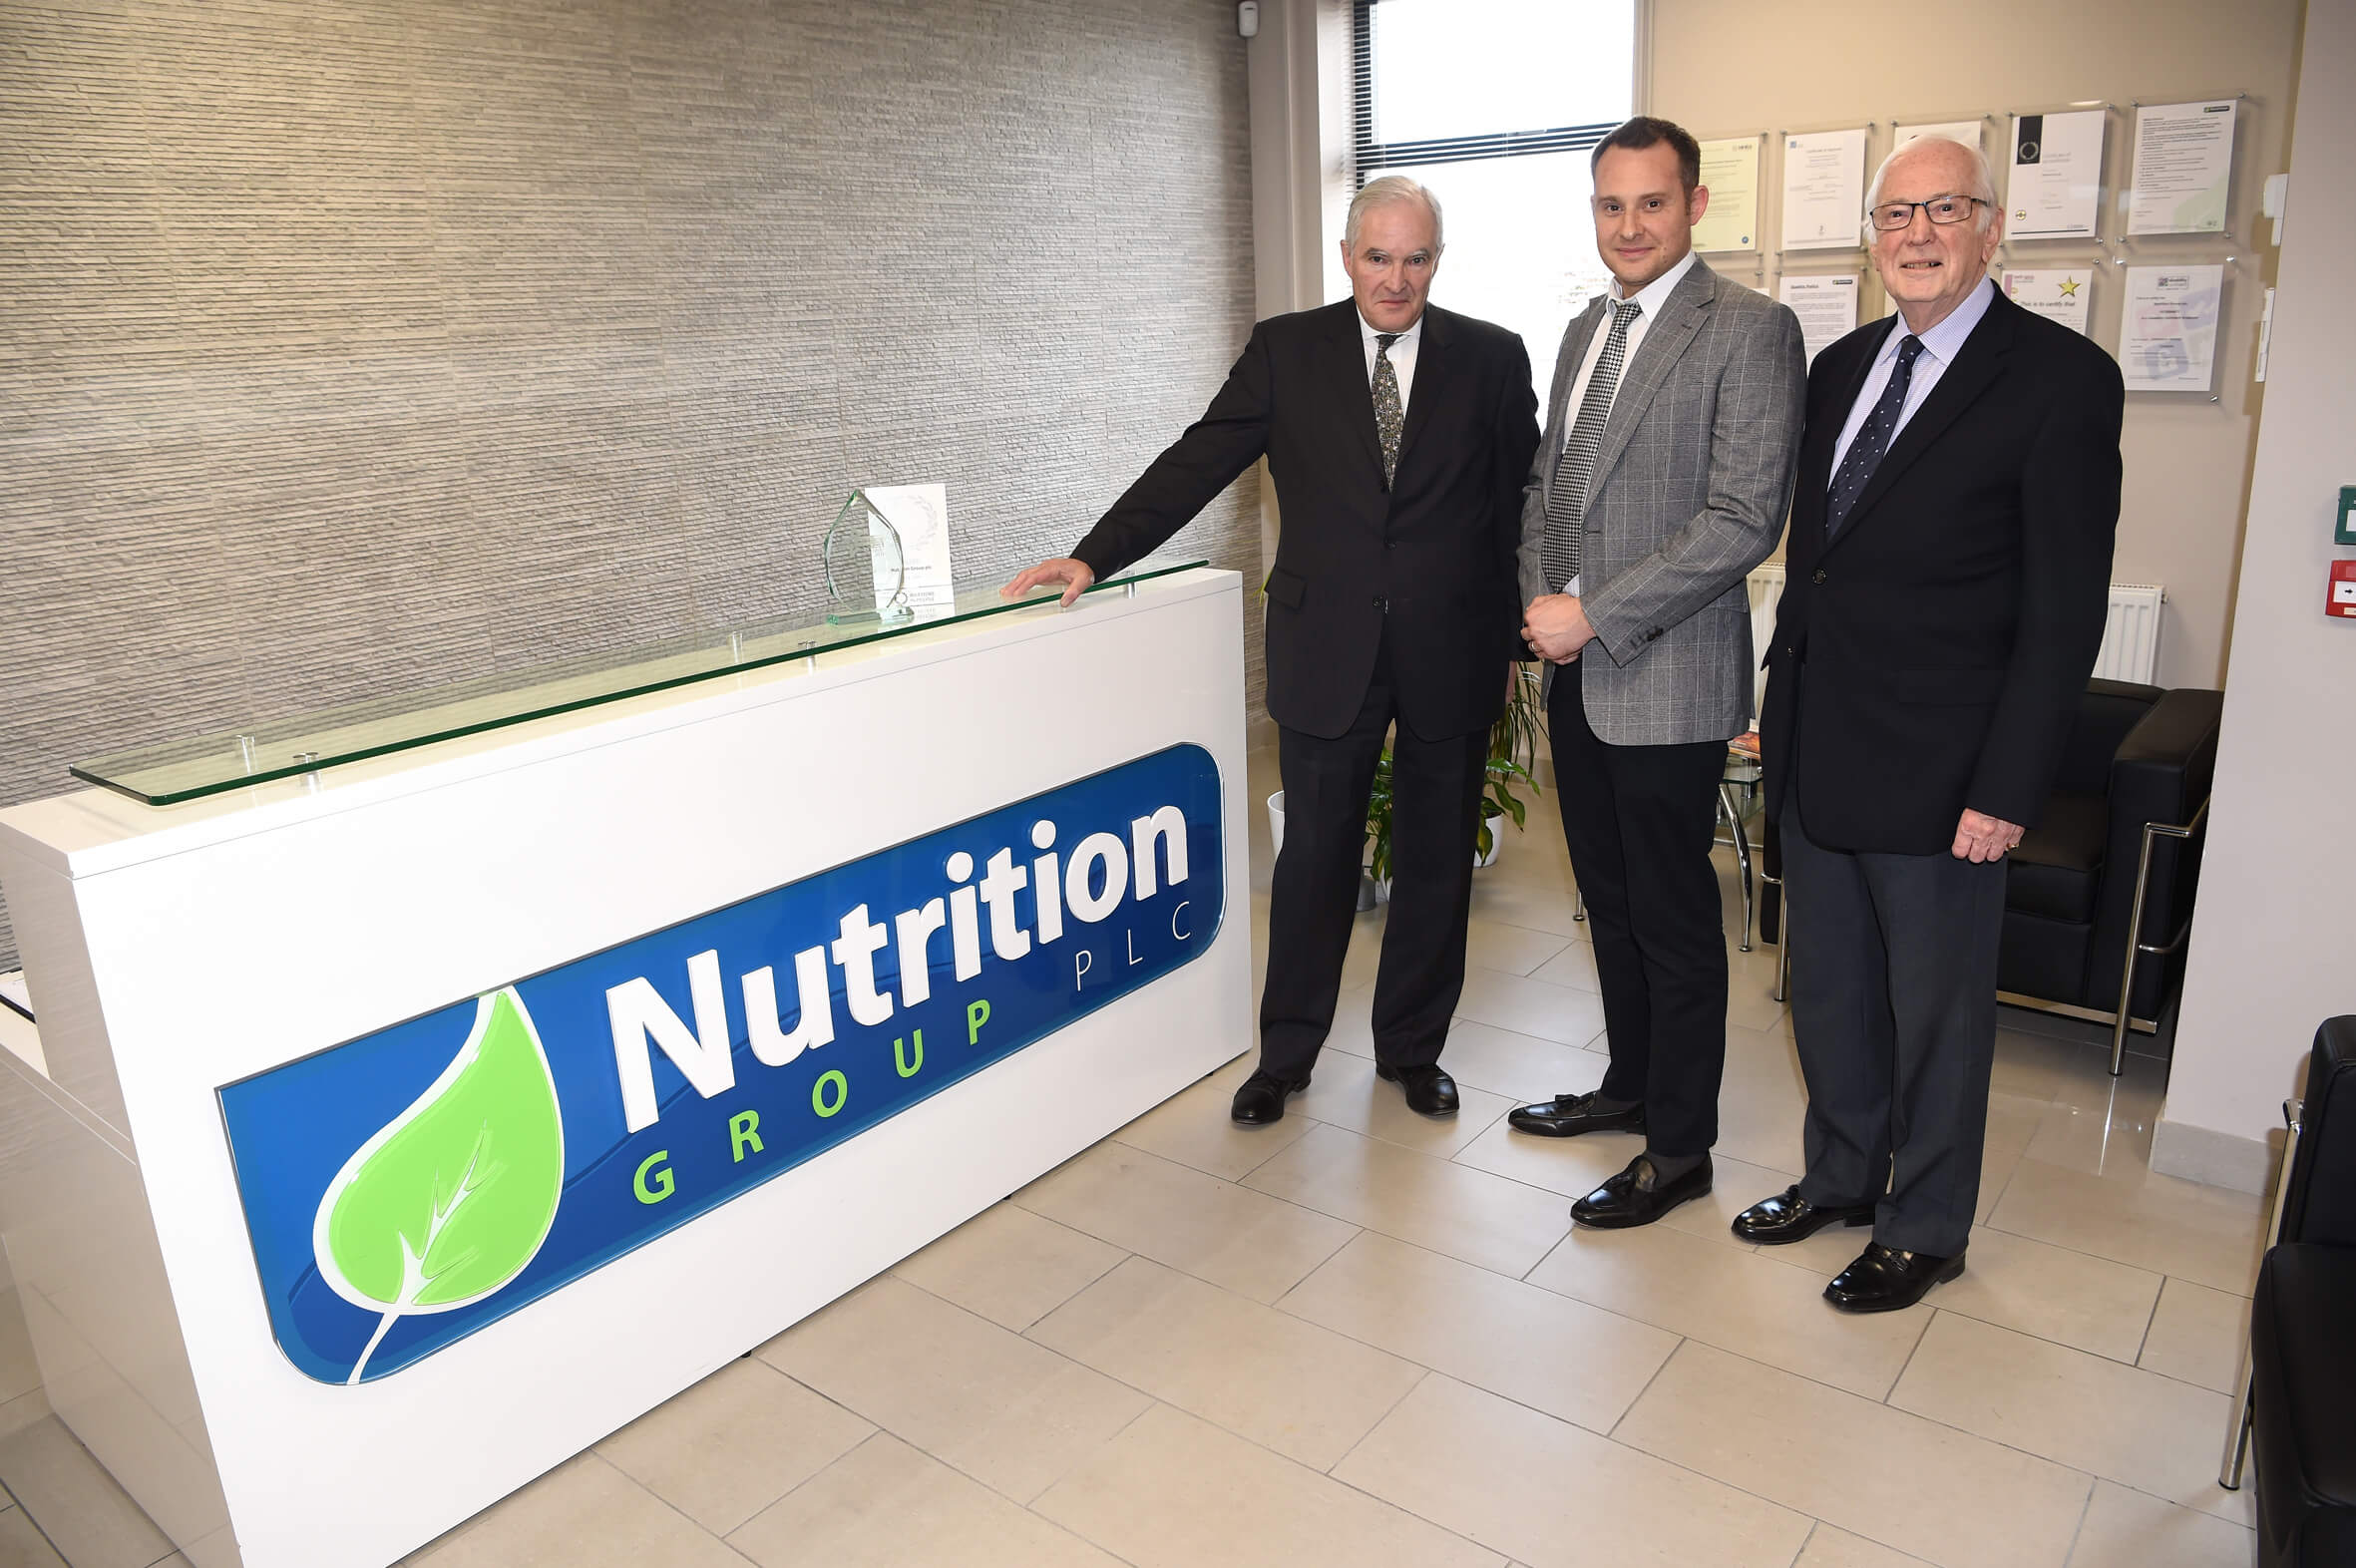 Richard Greathead and the Nutrition Group